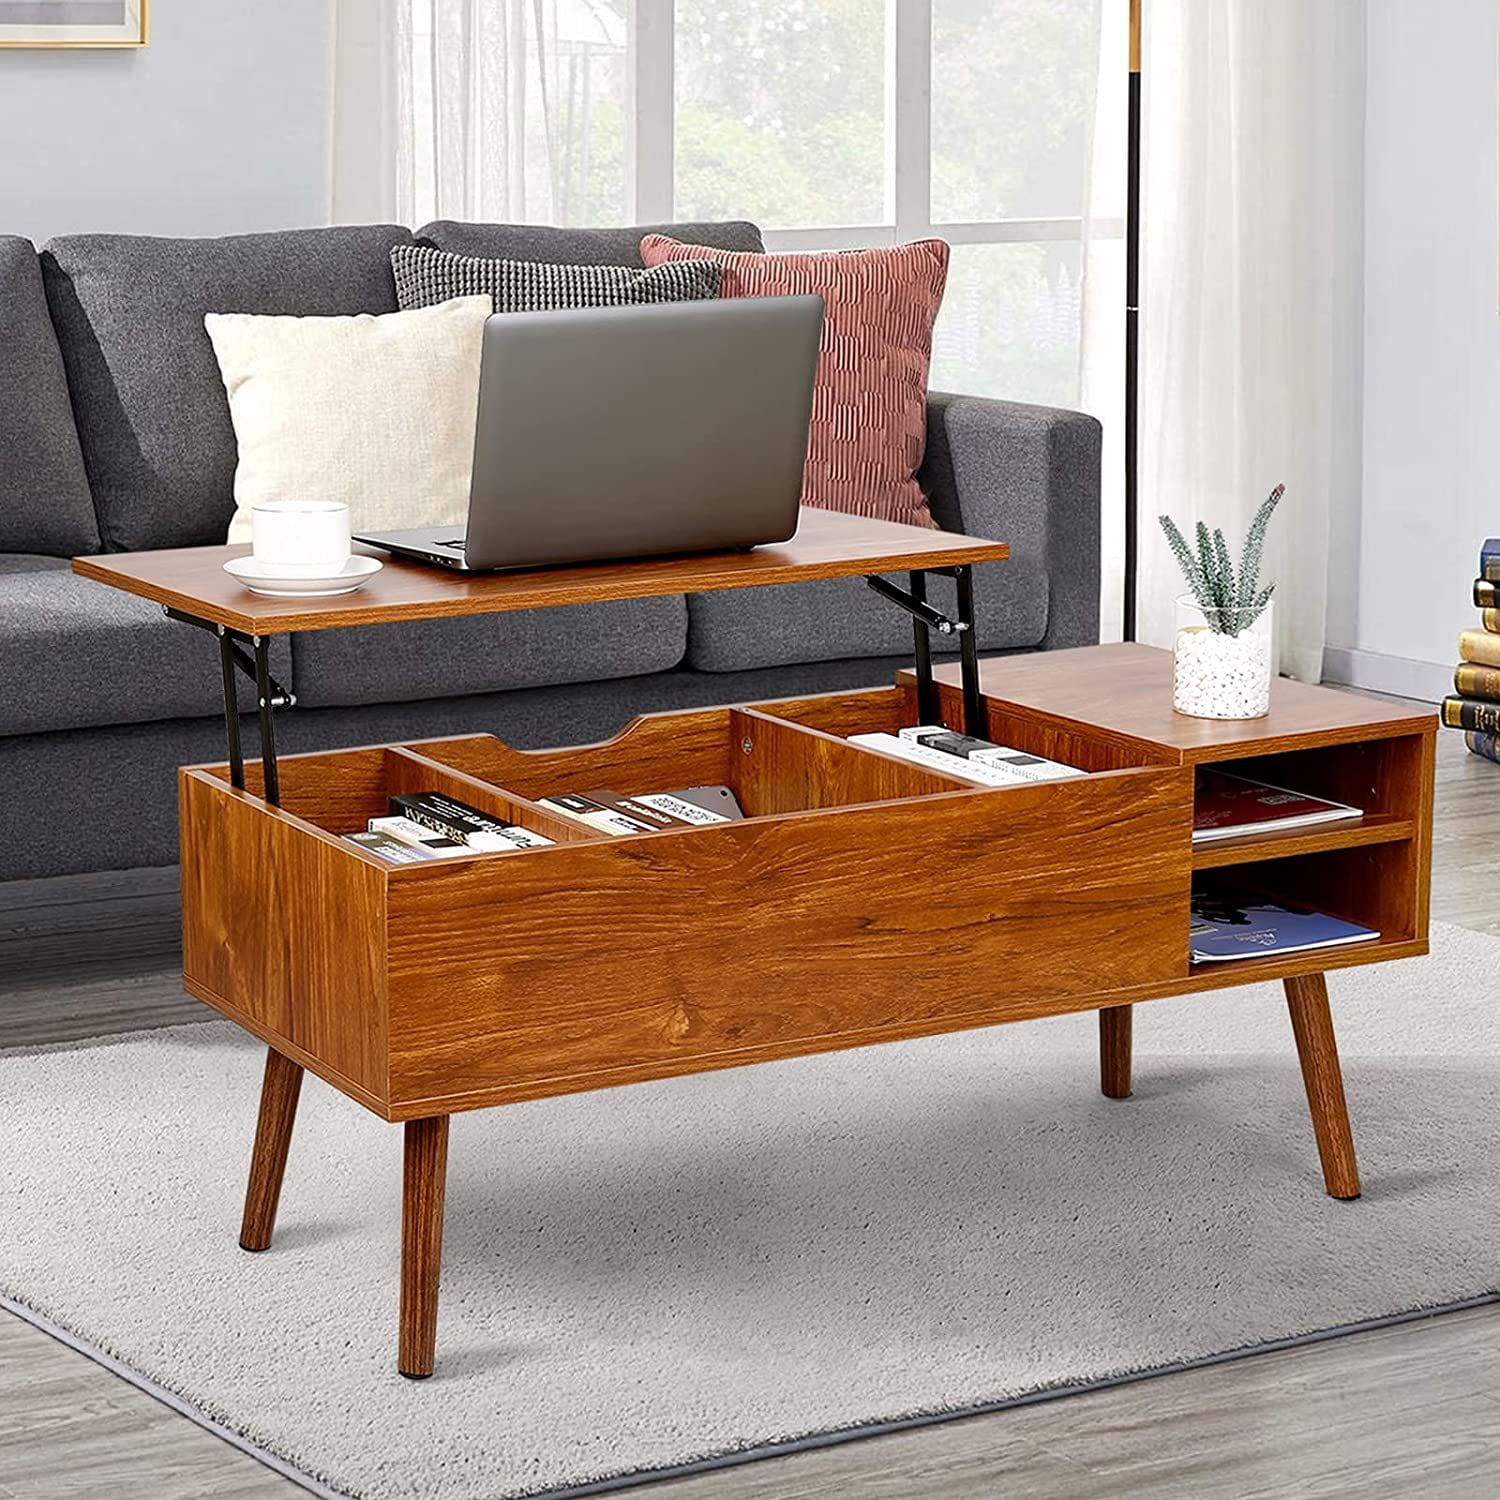 Modern Lift Top Coffee Table With Hidden Compartment Storage,adjustable Within Coffee Tables With Hidden Compartments (View 8 of 15)